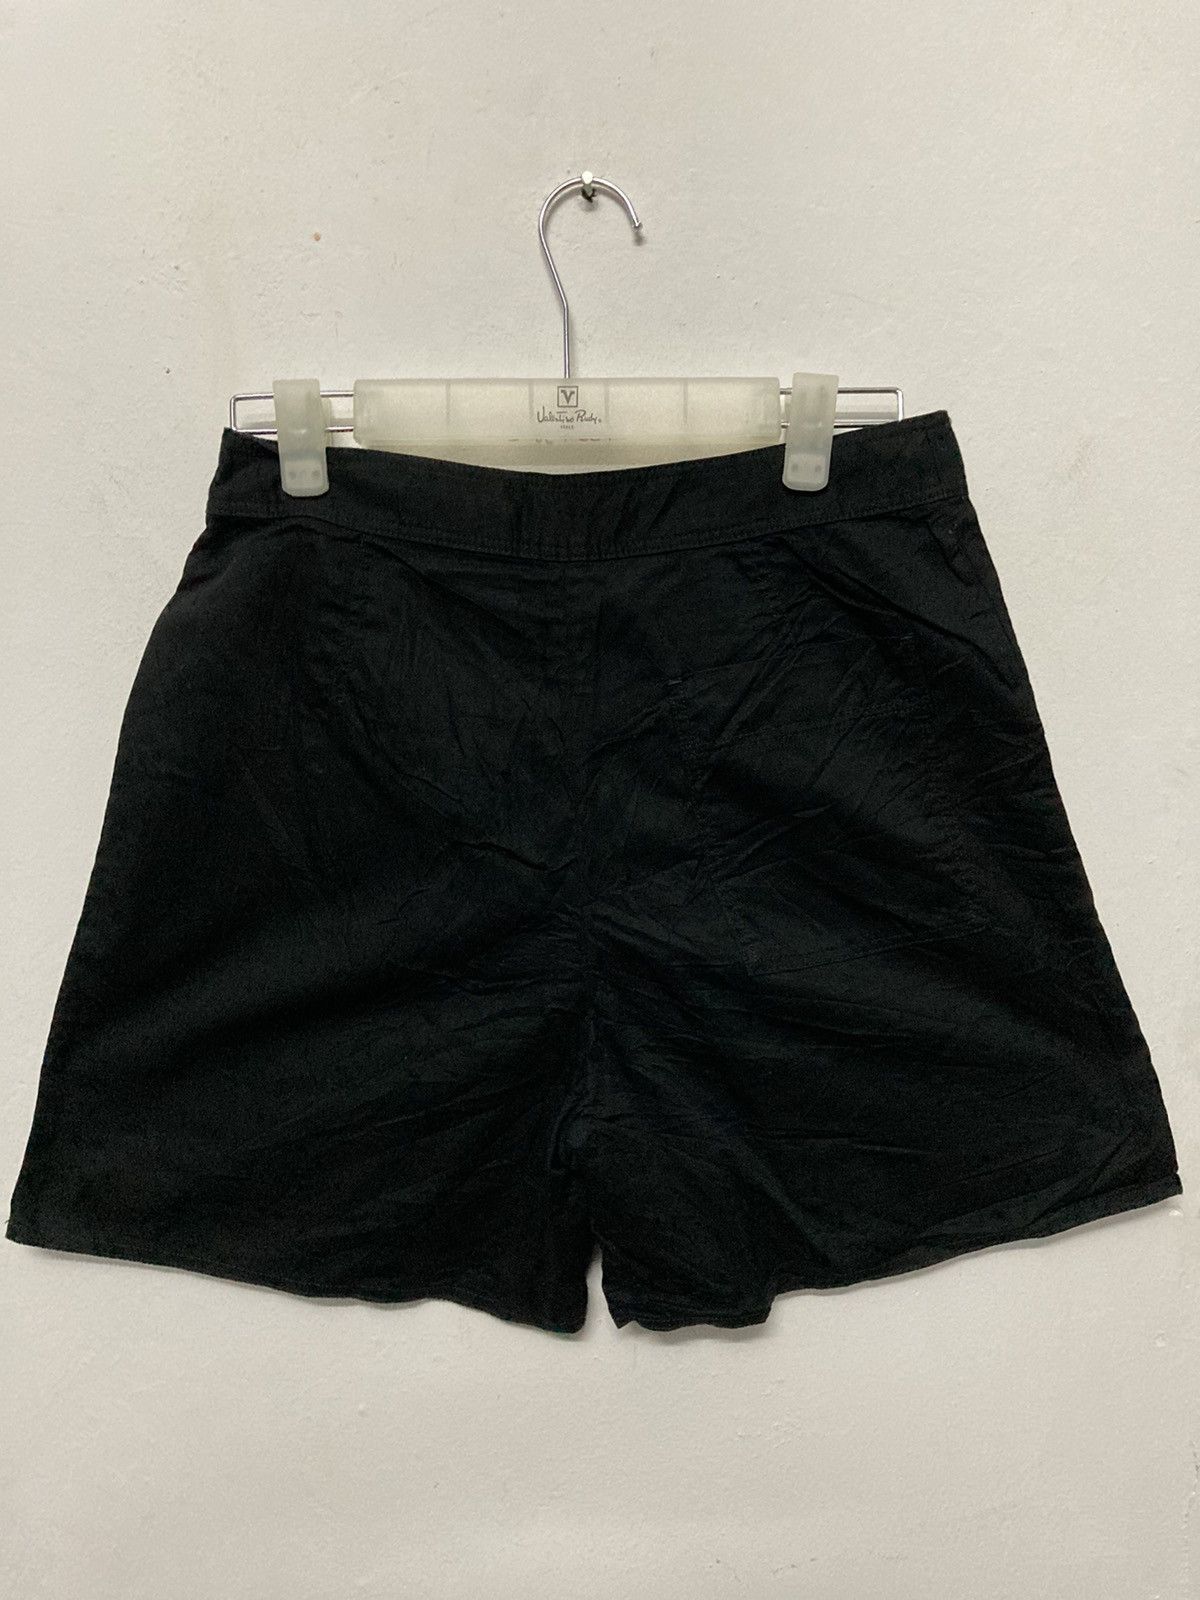 Uniqlo and Lemaire Short Pants - 2